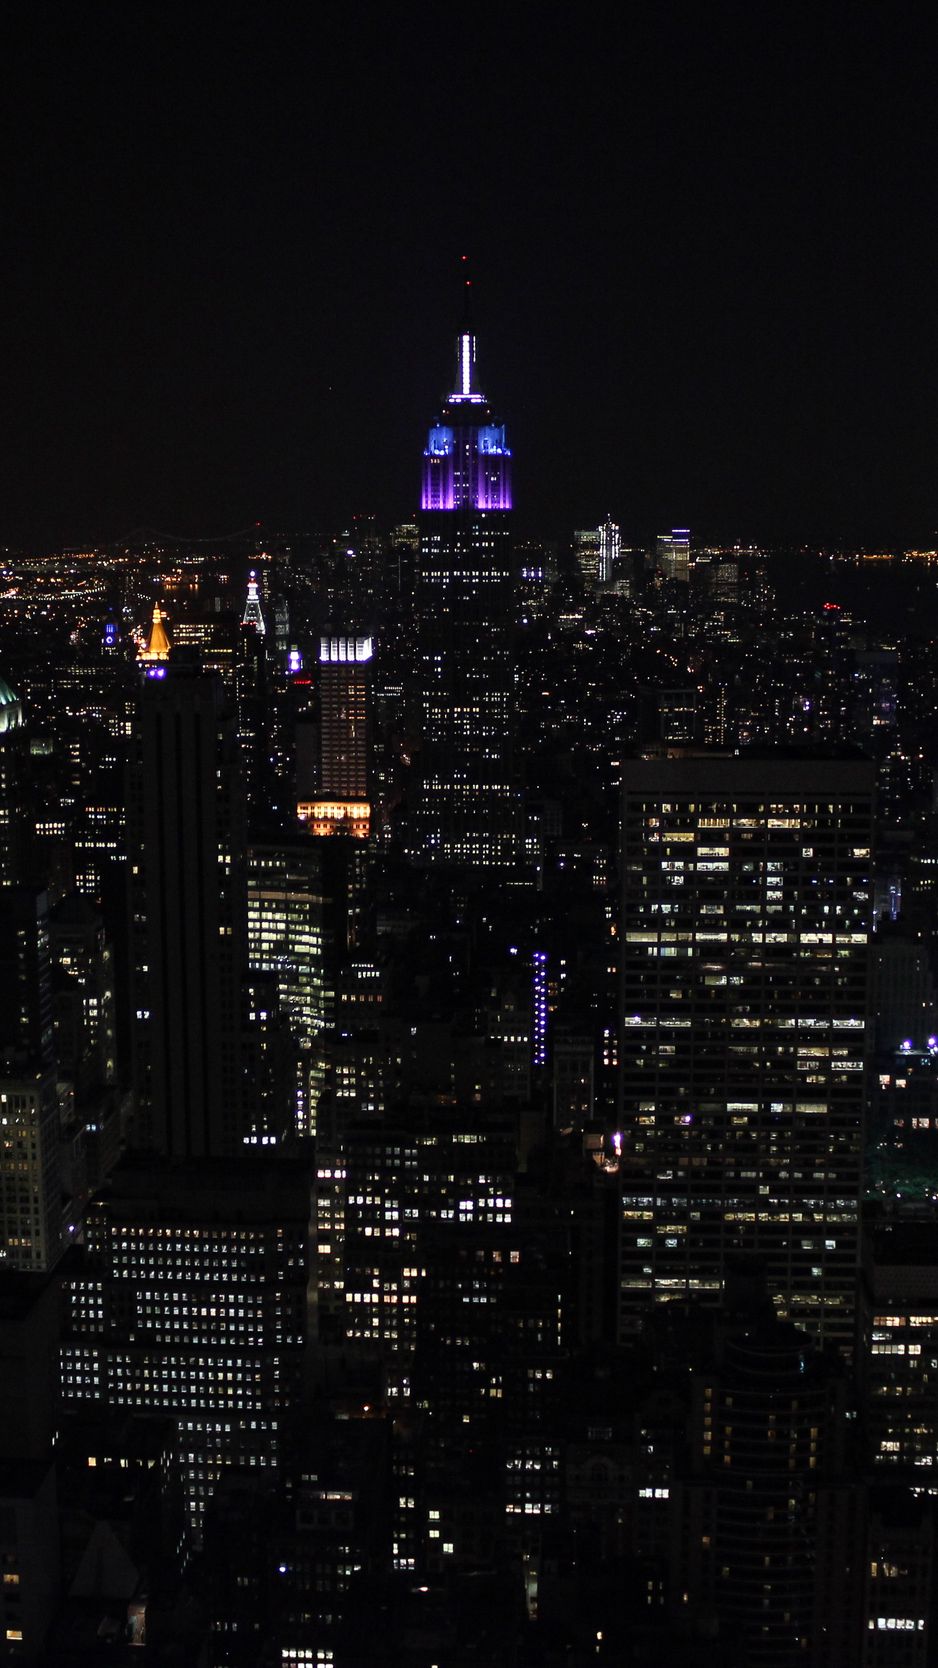 Download wallpaper 938x1668 night city, city lights, skyscrapers, night,  skyline, new york, usa iphone 8/7/6s/6 for parallax hd background